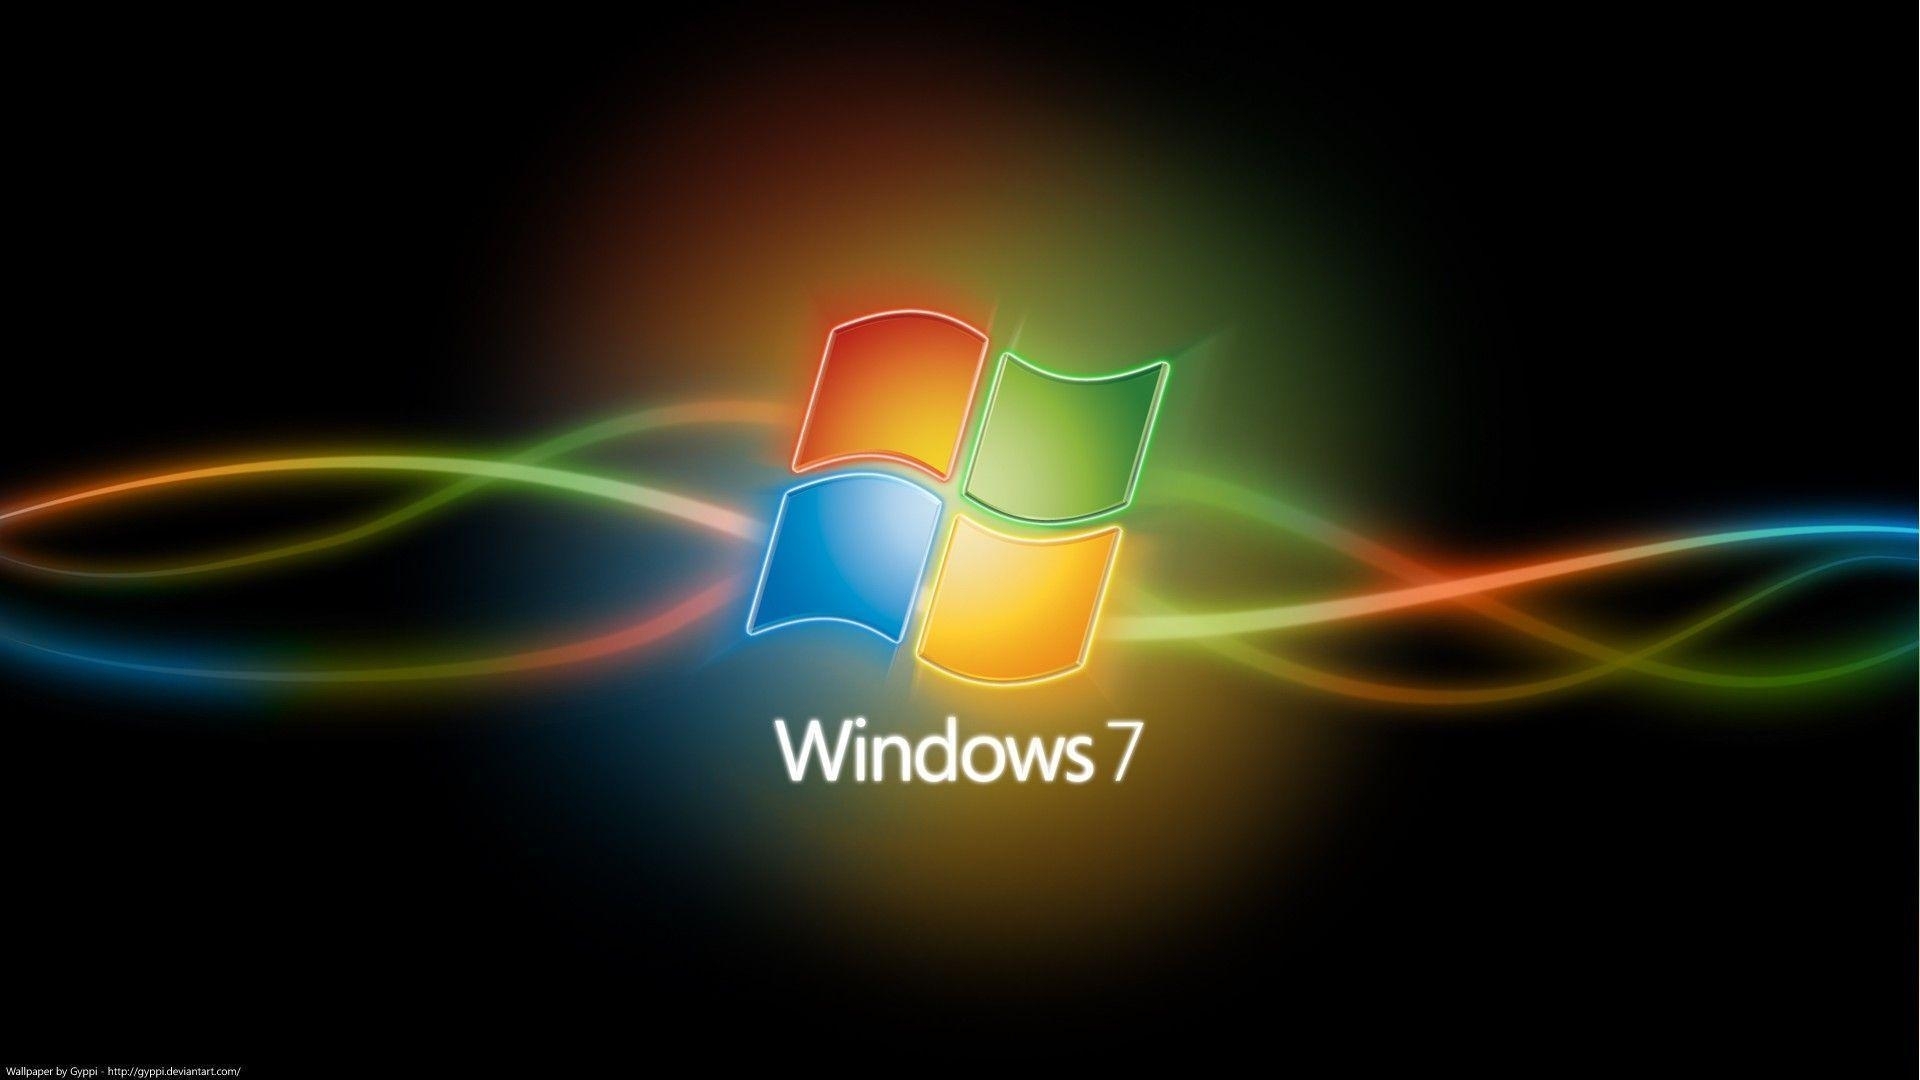 gif backgrounds windows 7 - wallpaper cave